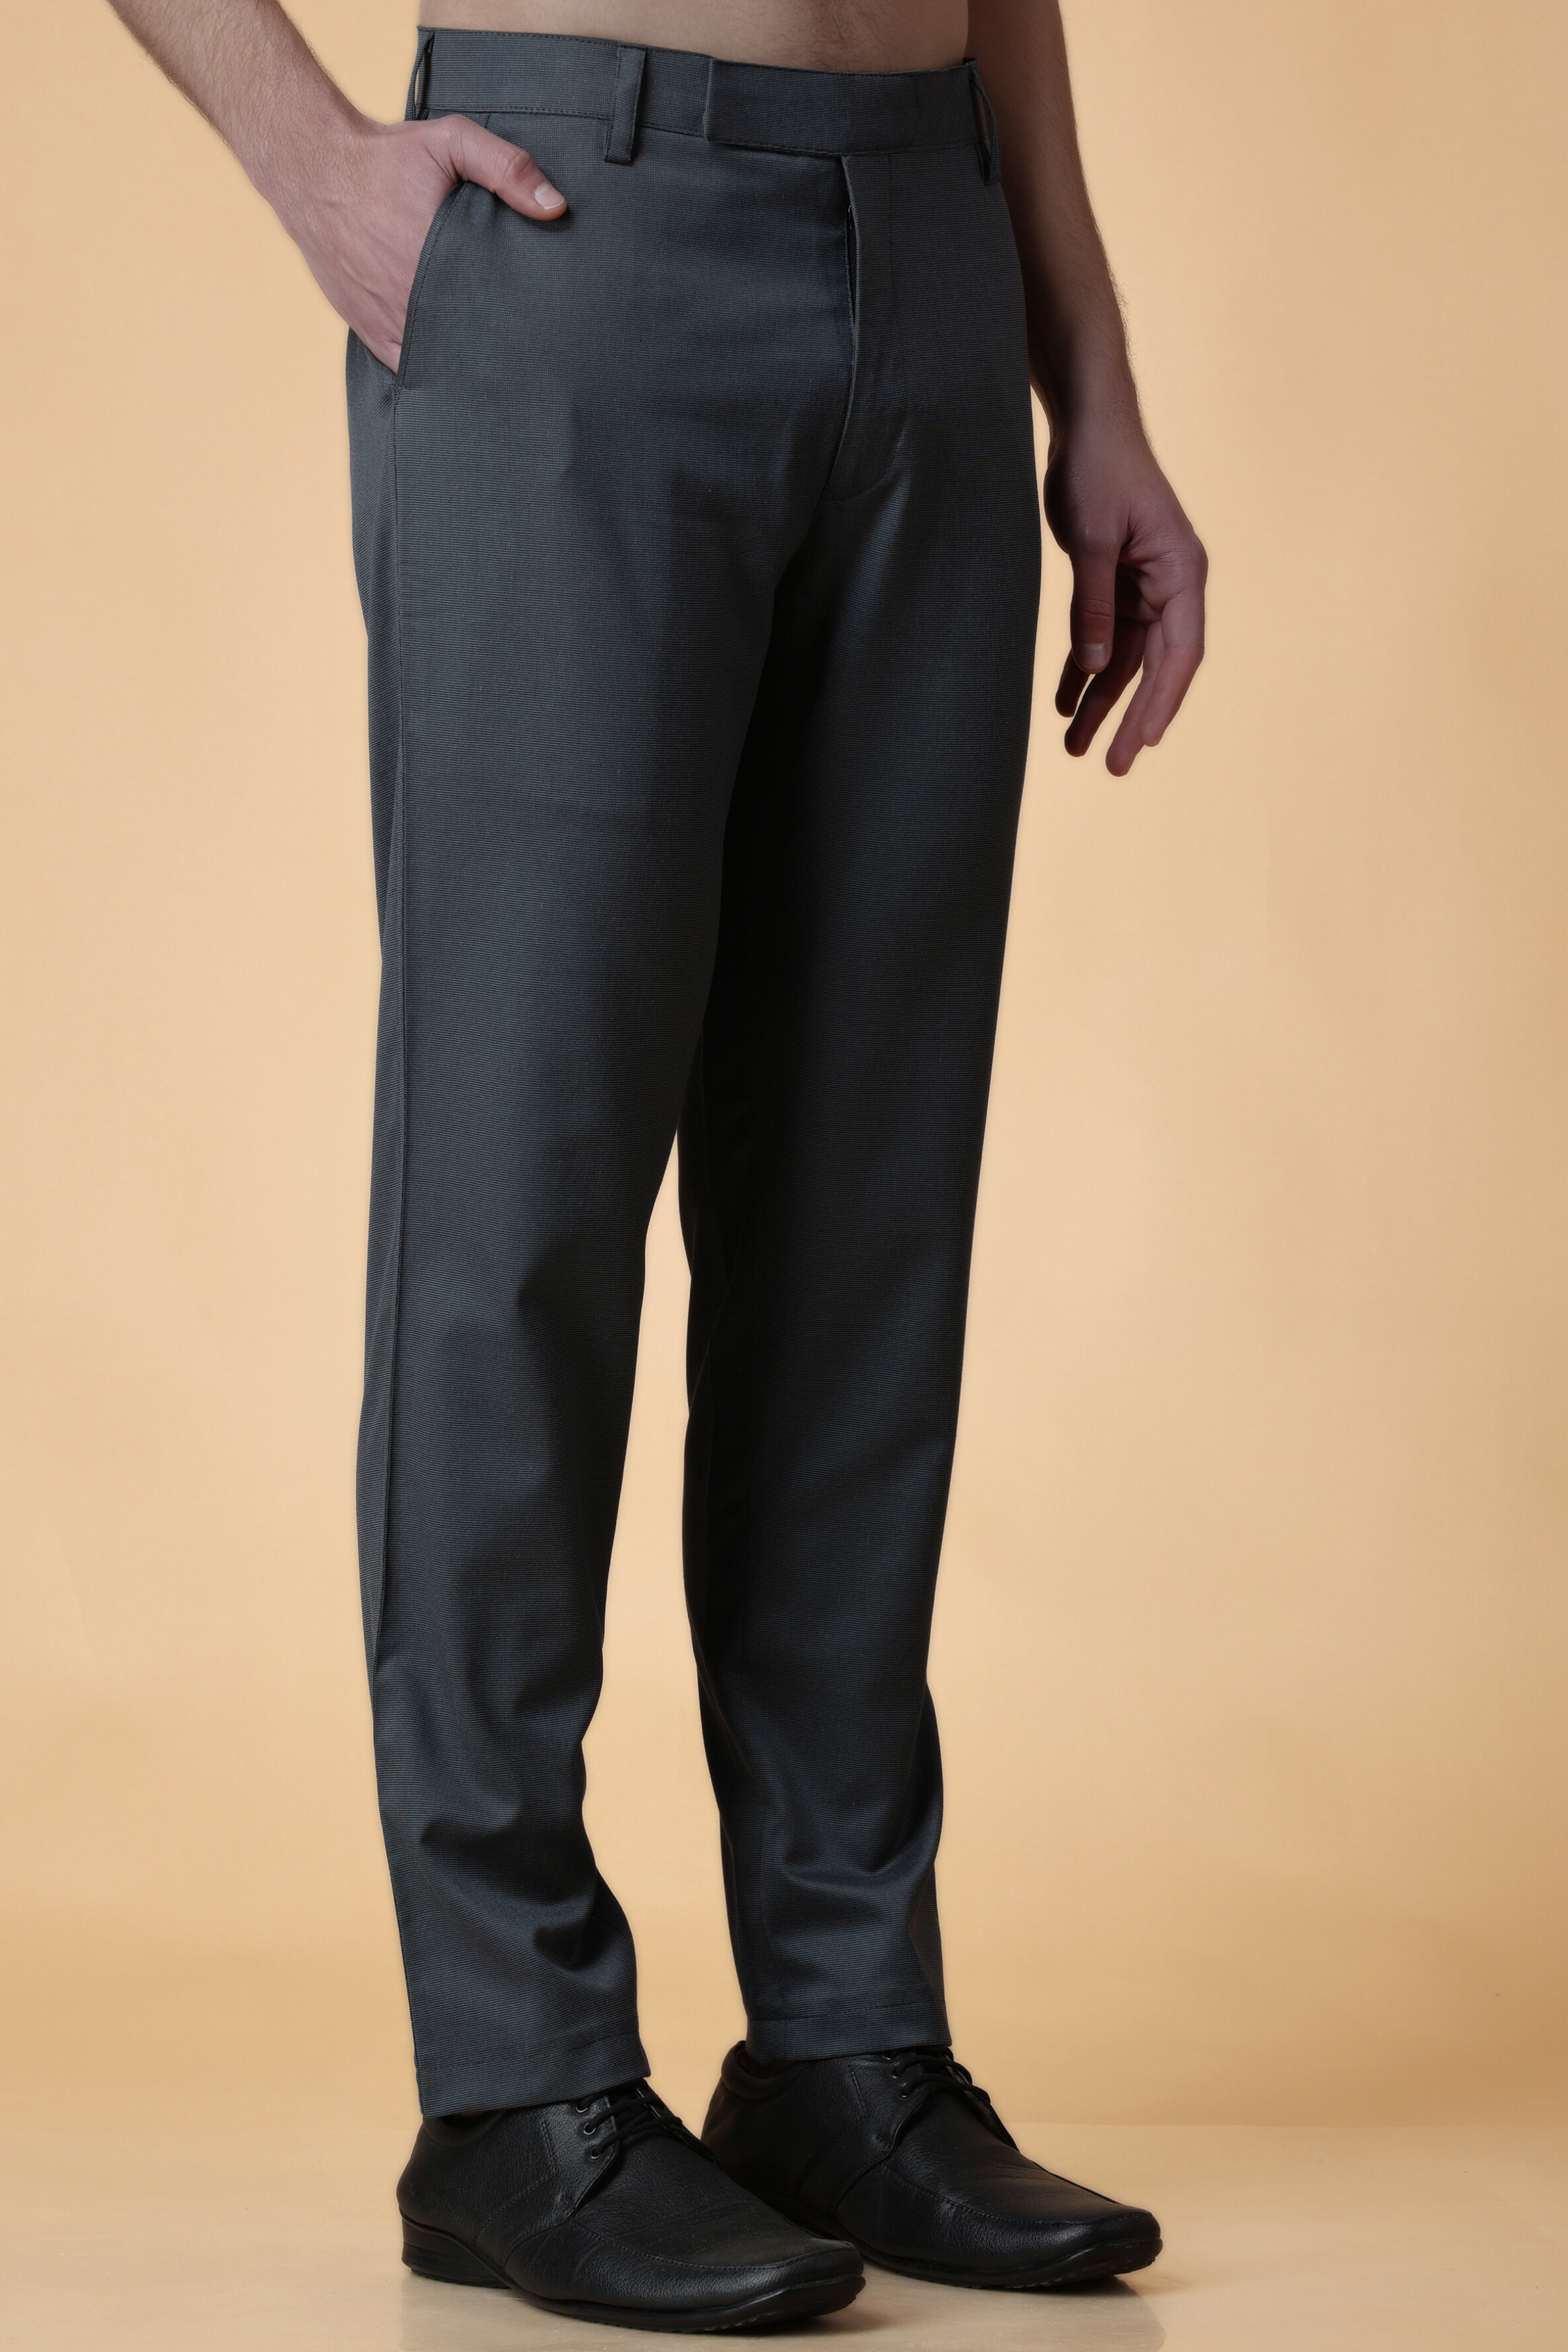 Buy Men Olive Slim Fit Solid Casual Trousers Online - 800483 | Allen Solly